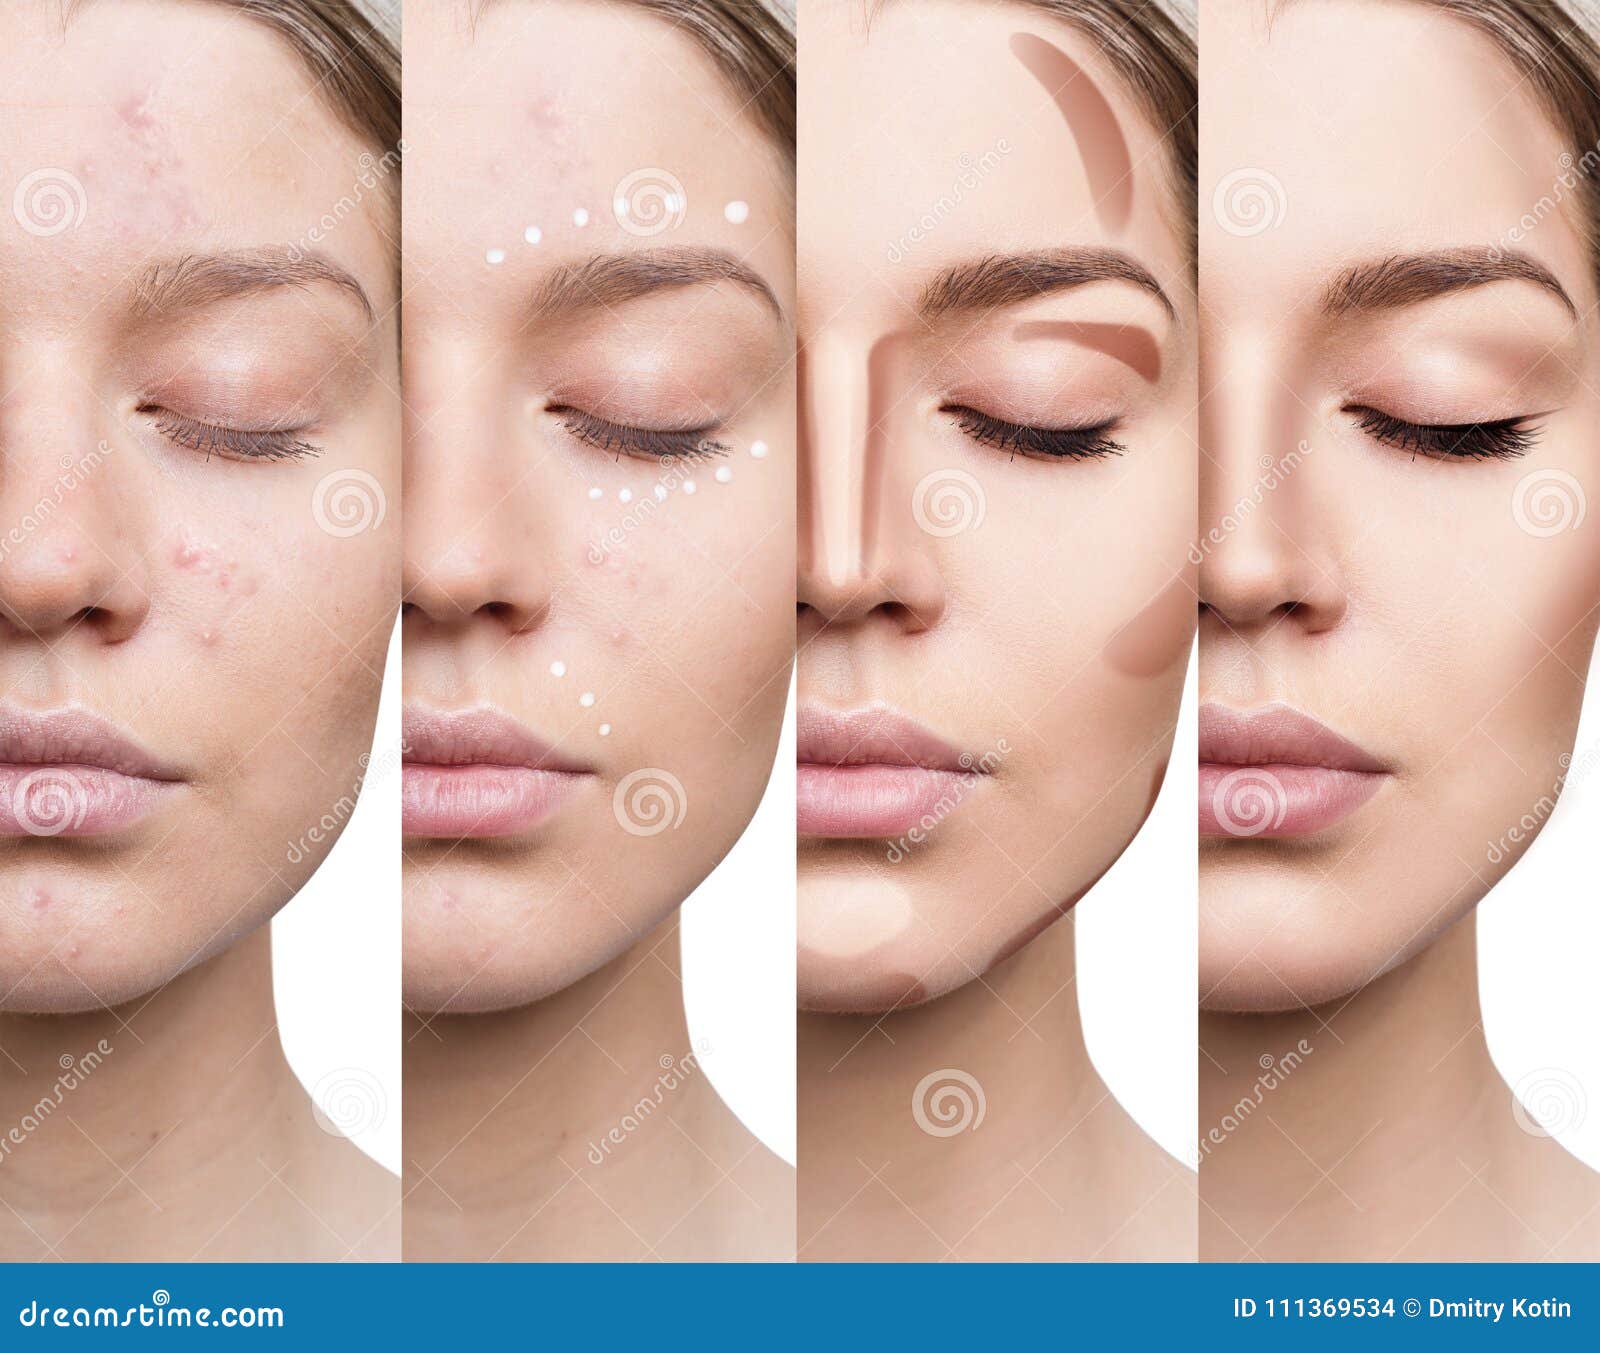 woman applying makeup step by step. stock photo - image of